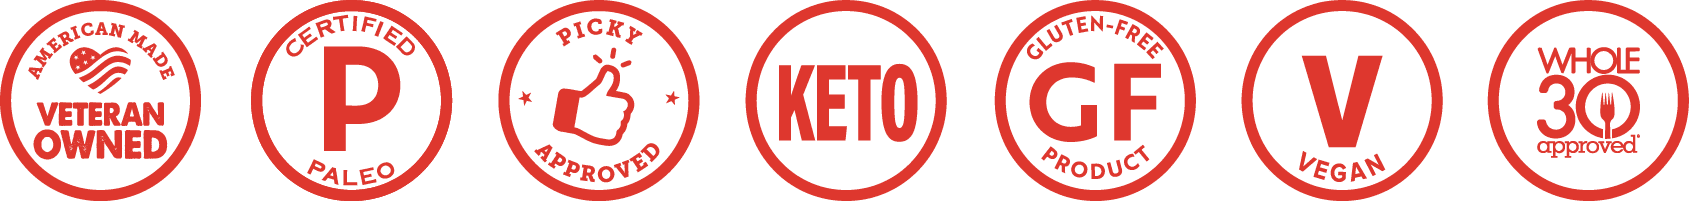 Veteran Owned, Paleo, Picky Approved, Keto, Gluten Free, Vegan, Whole 30- Approved